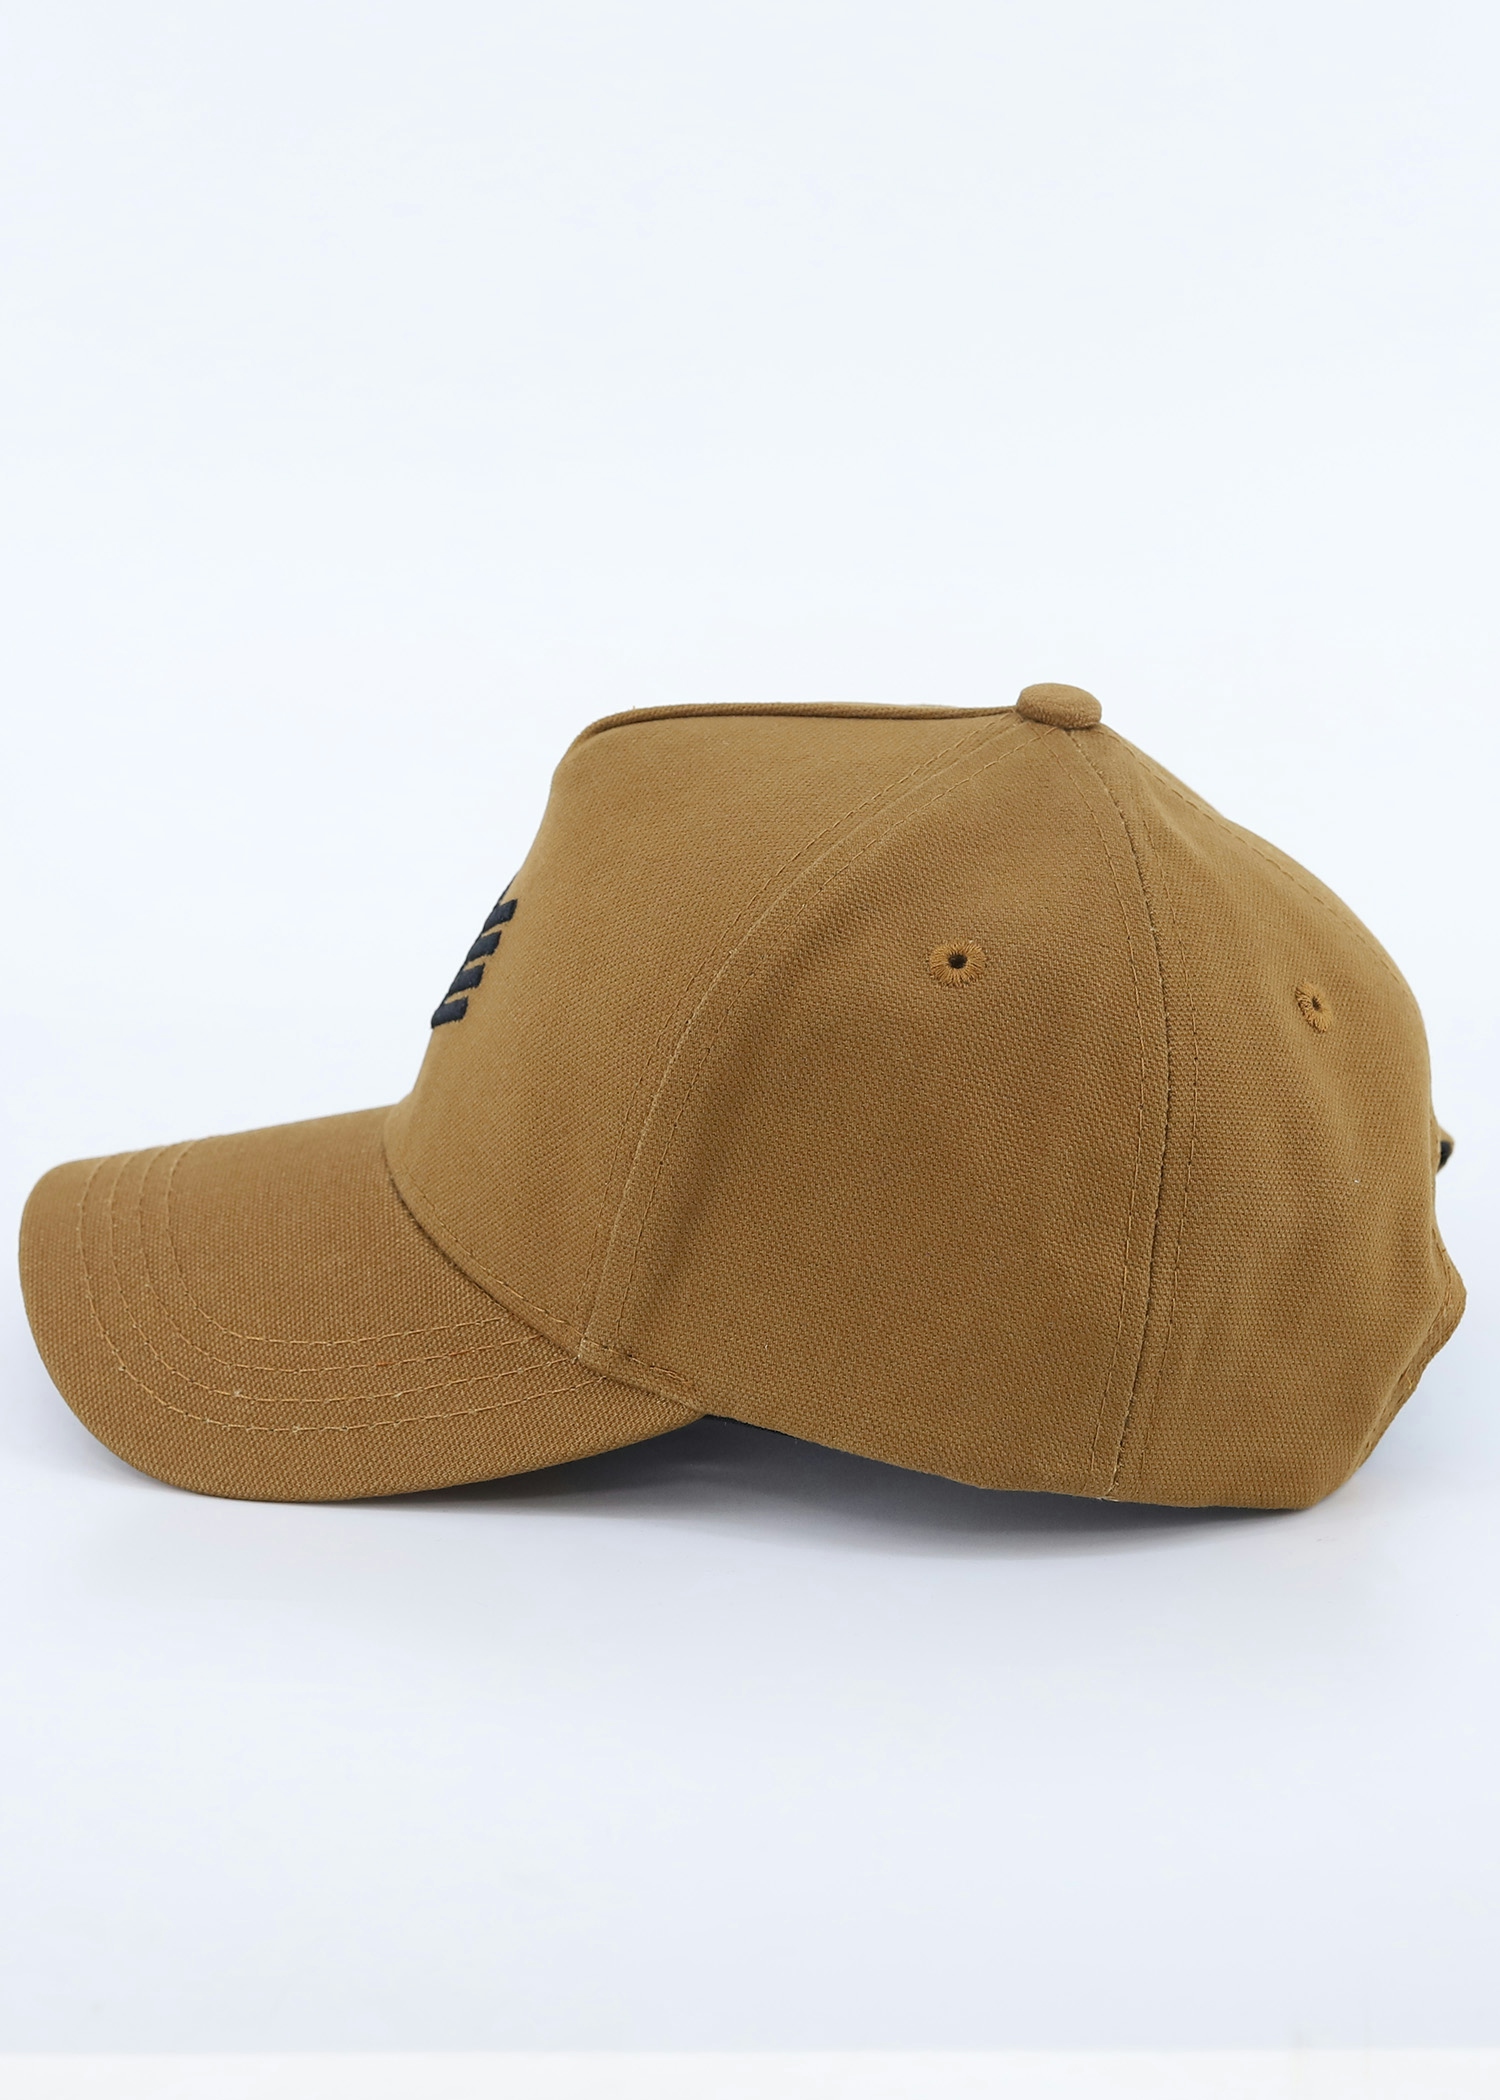 rooster visor cap brown color side view